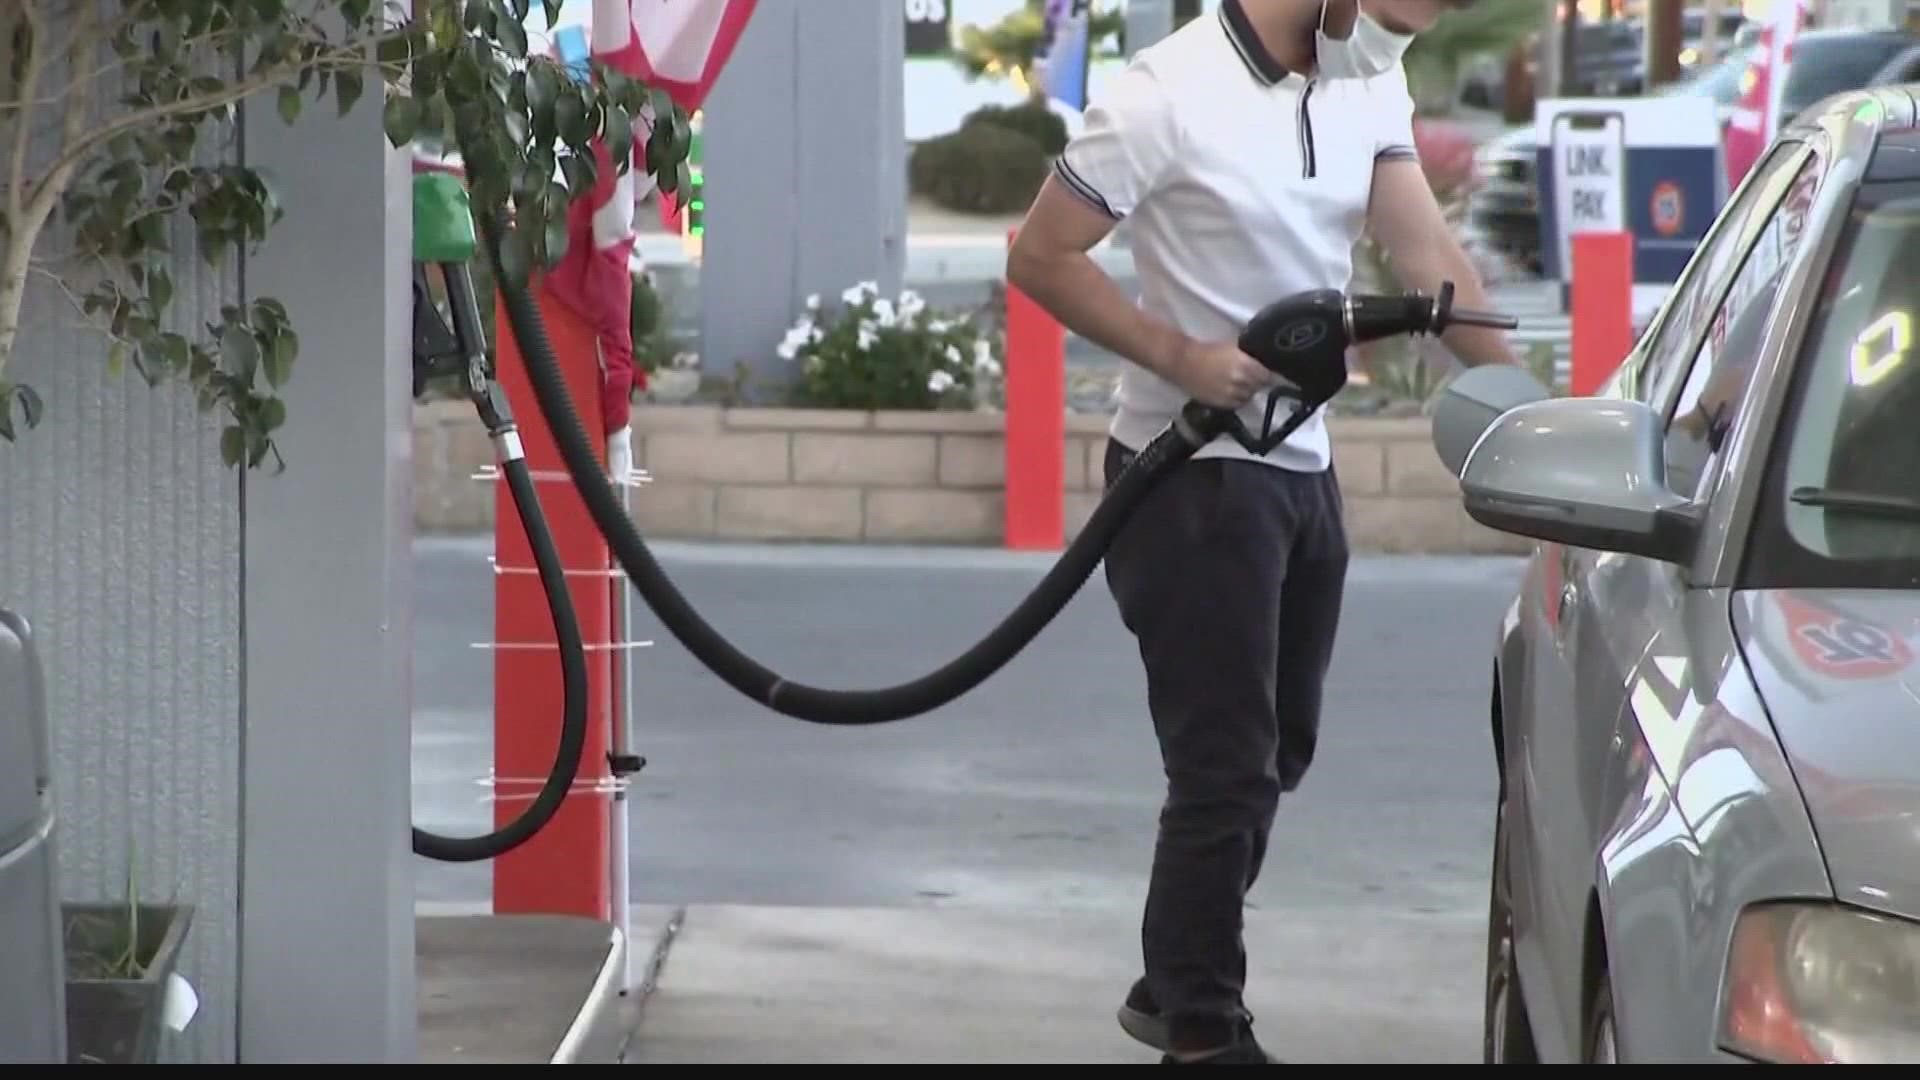 When filling up their gas tank, some people are noticing the gas pump stops before they've filled up all the way. 12 News looks into the issue.